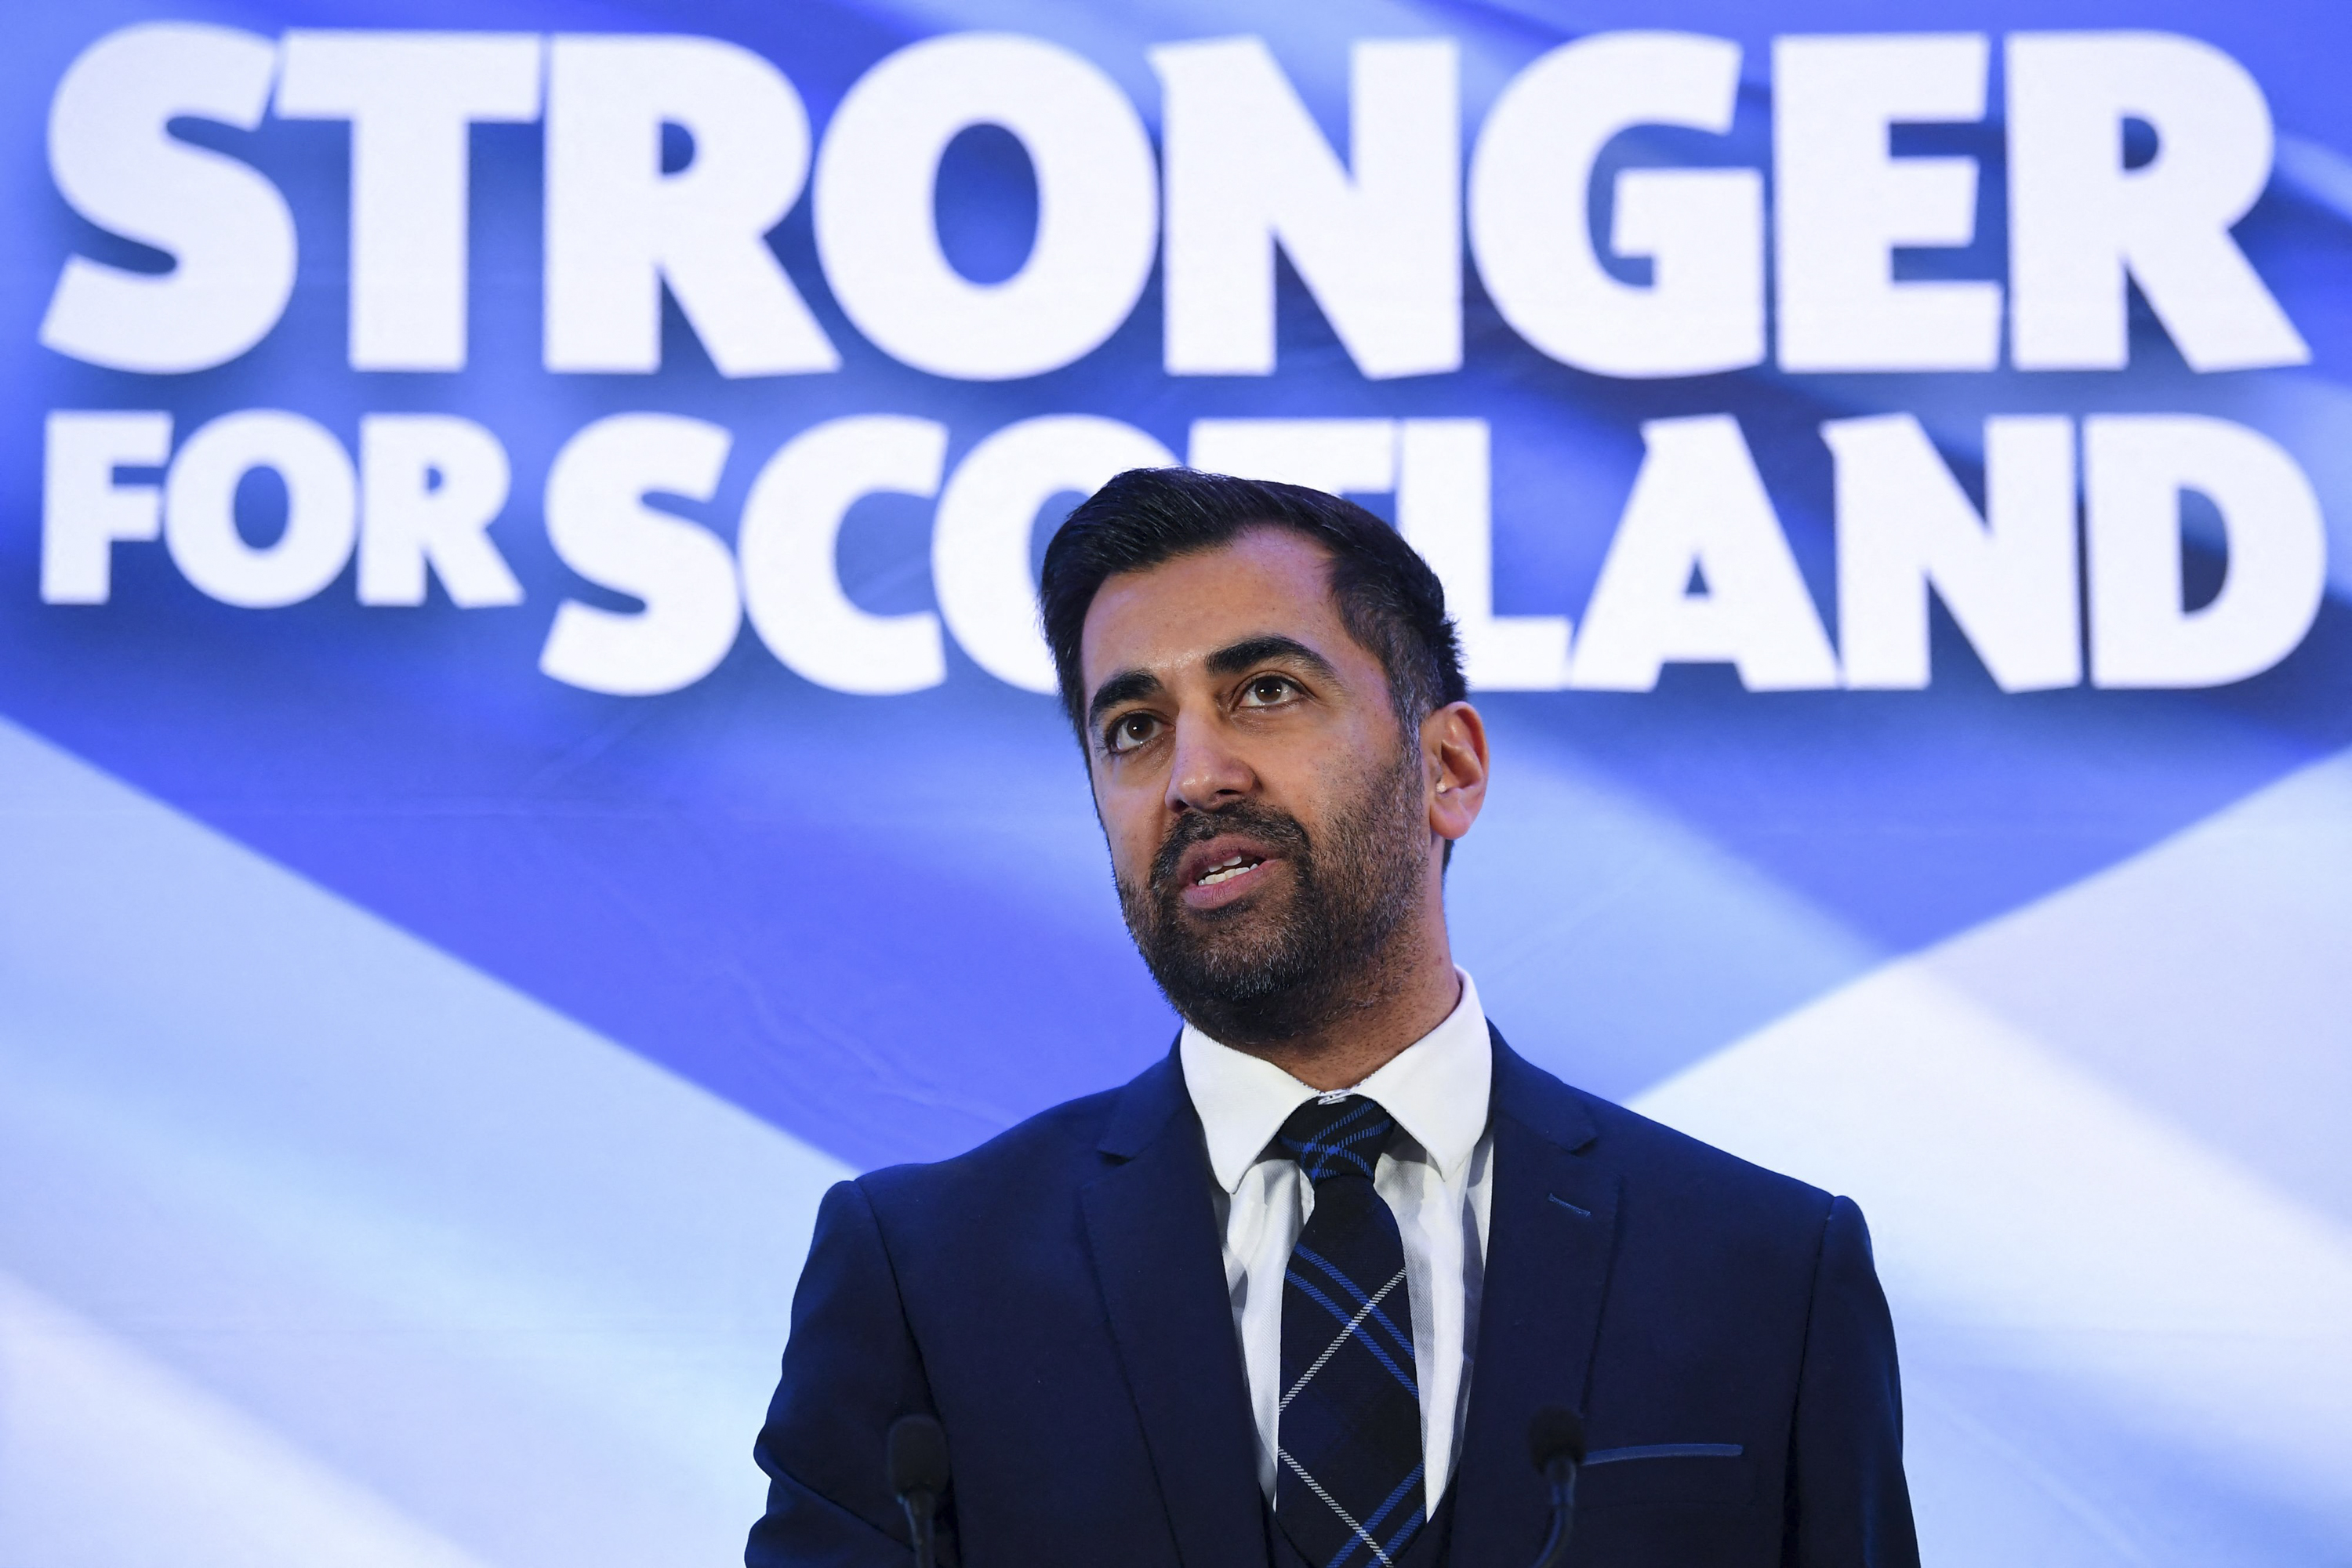 Newly appointed leader of the Scottish National Party (SNP), Humza Yousaf speaks following the SNP Leadership election result announcement at Murrayfield Stadium in Edinburgh, Scotland, on March 27, 2023.